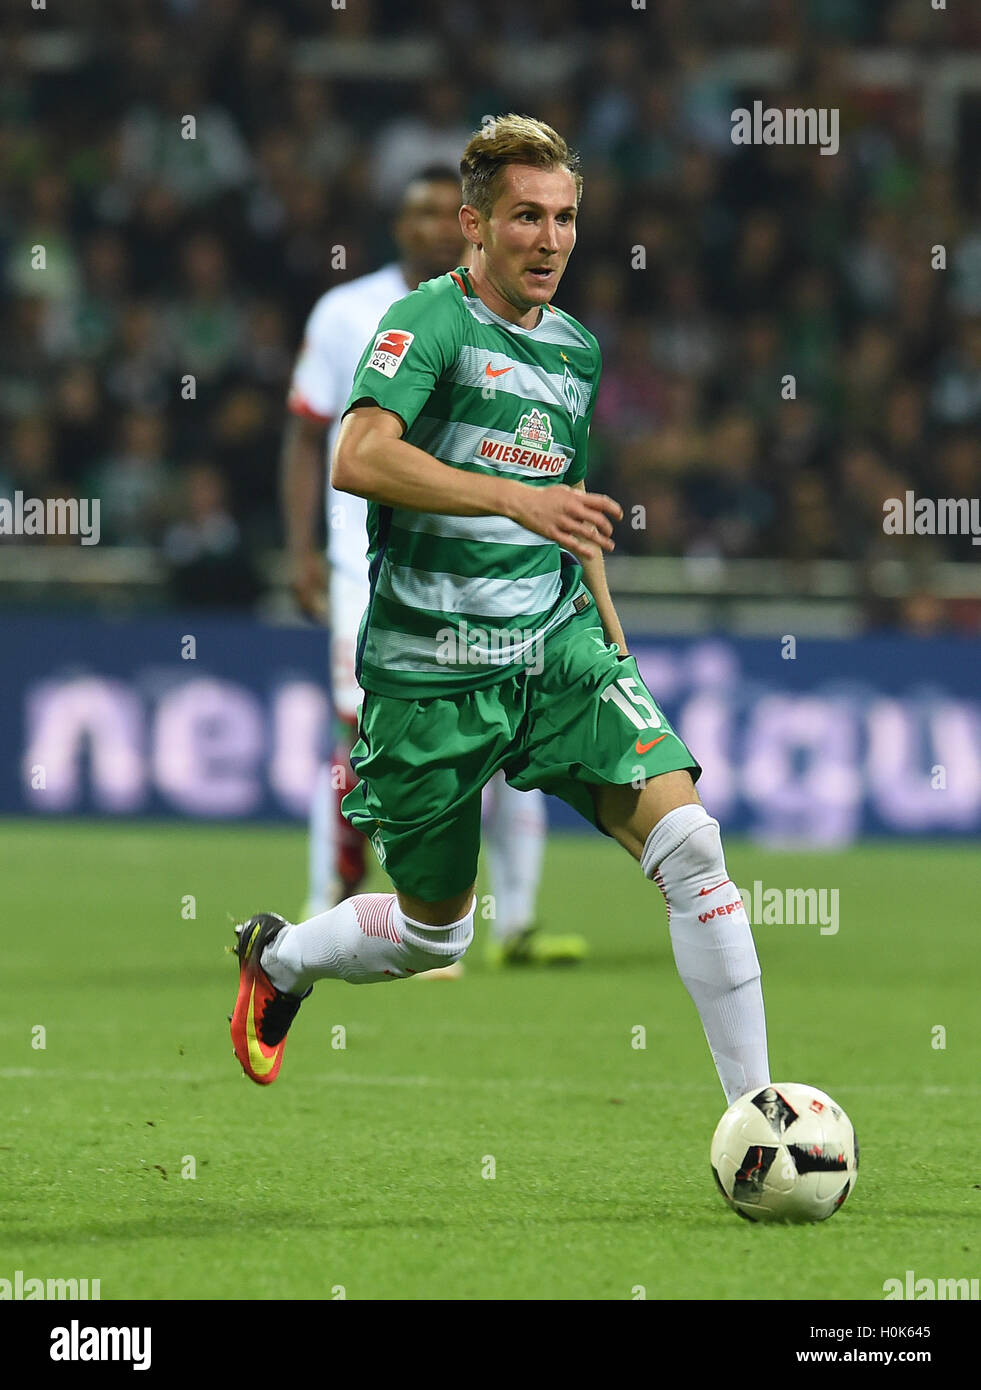 Bremen, Germany. 21st Sep, 2016. Bremen's Izet Hajrovic with the ball during the match of Werder Bremen against FSV Mainz 05 on the fourth match day of the Bundesliga at the Weserstadium in Bremen, Germany, 21 September 2016. PHOTO: CARMEN JASPERSEN/dpa/Alamy Live News Stock Photo